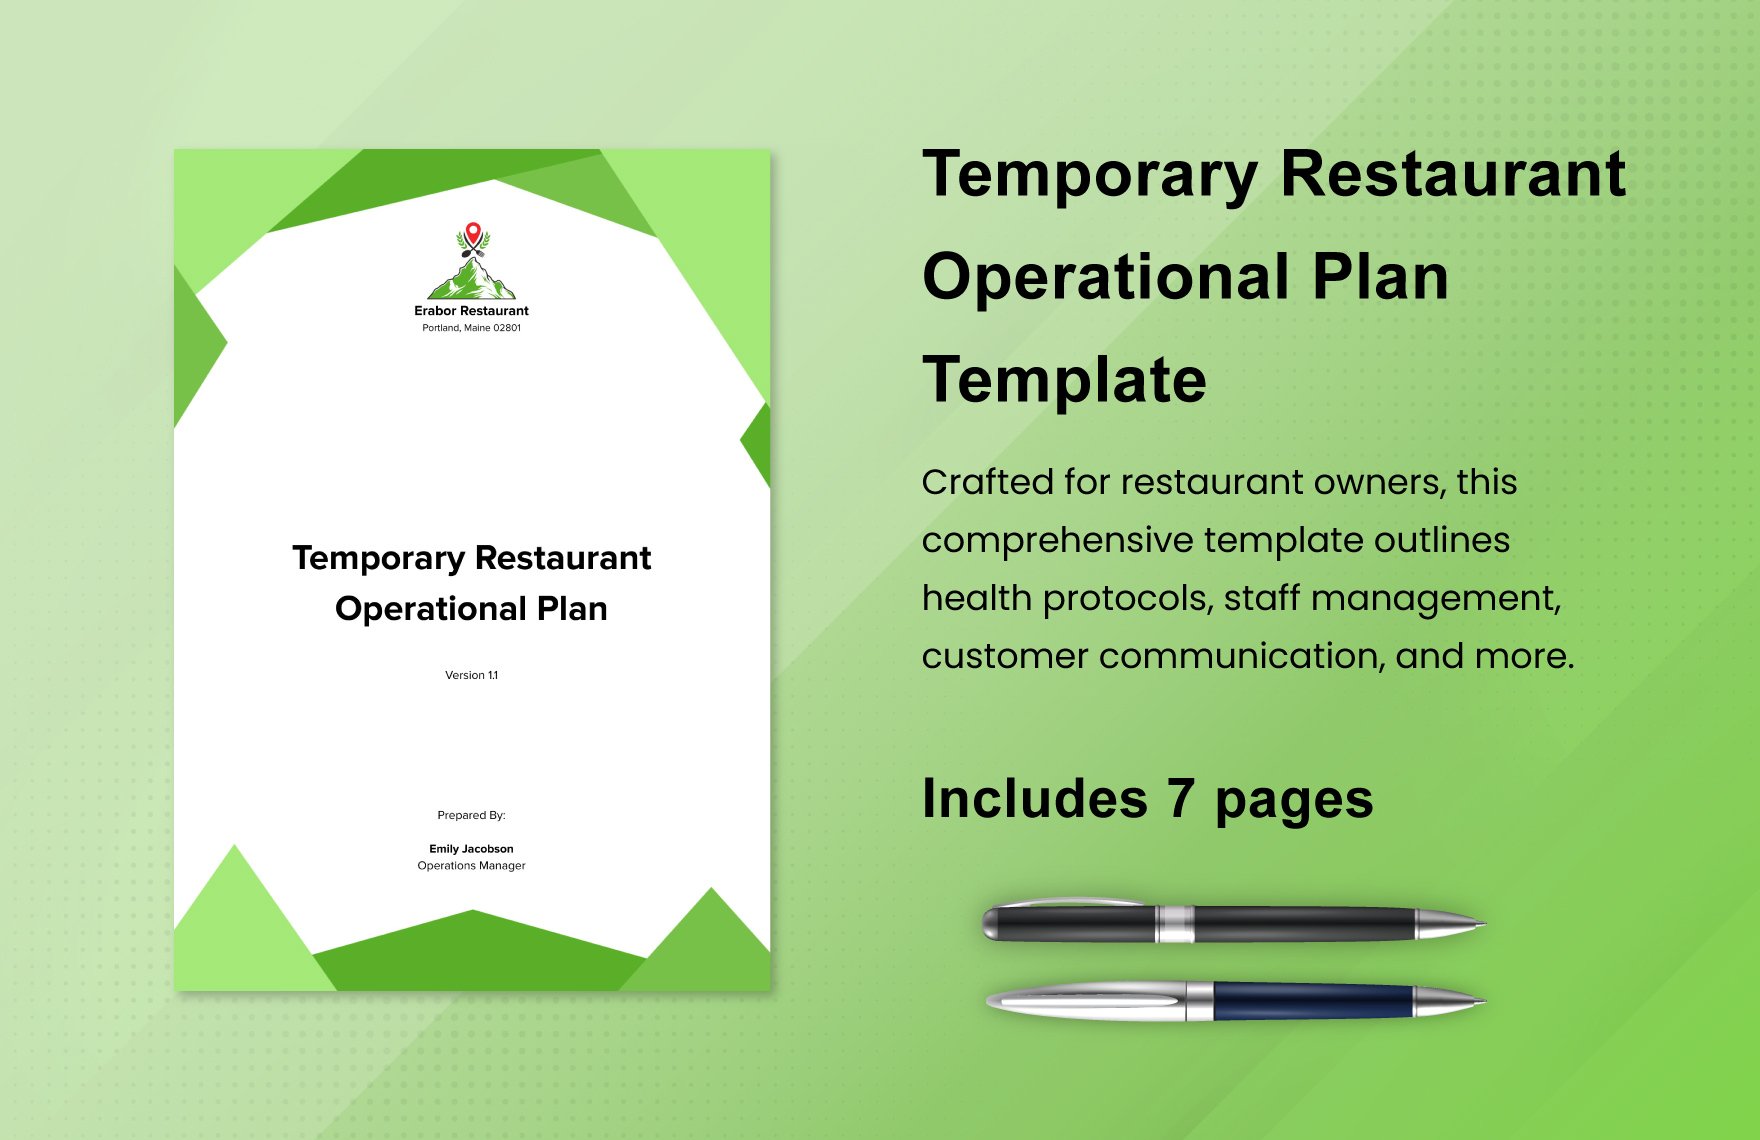 Operational Plan Template in PDF